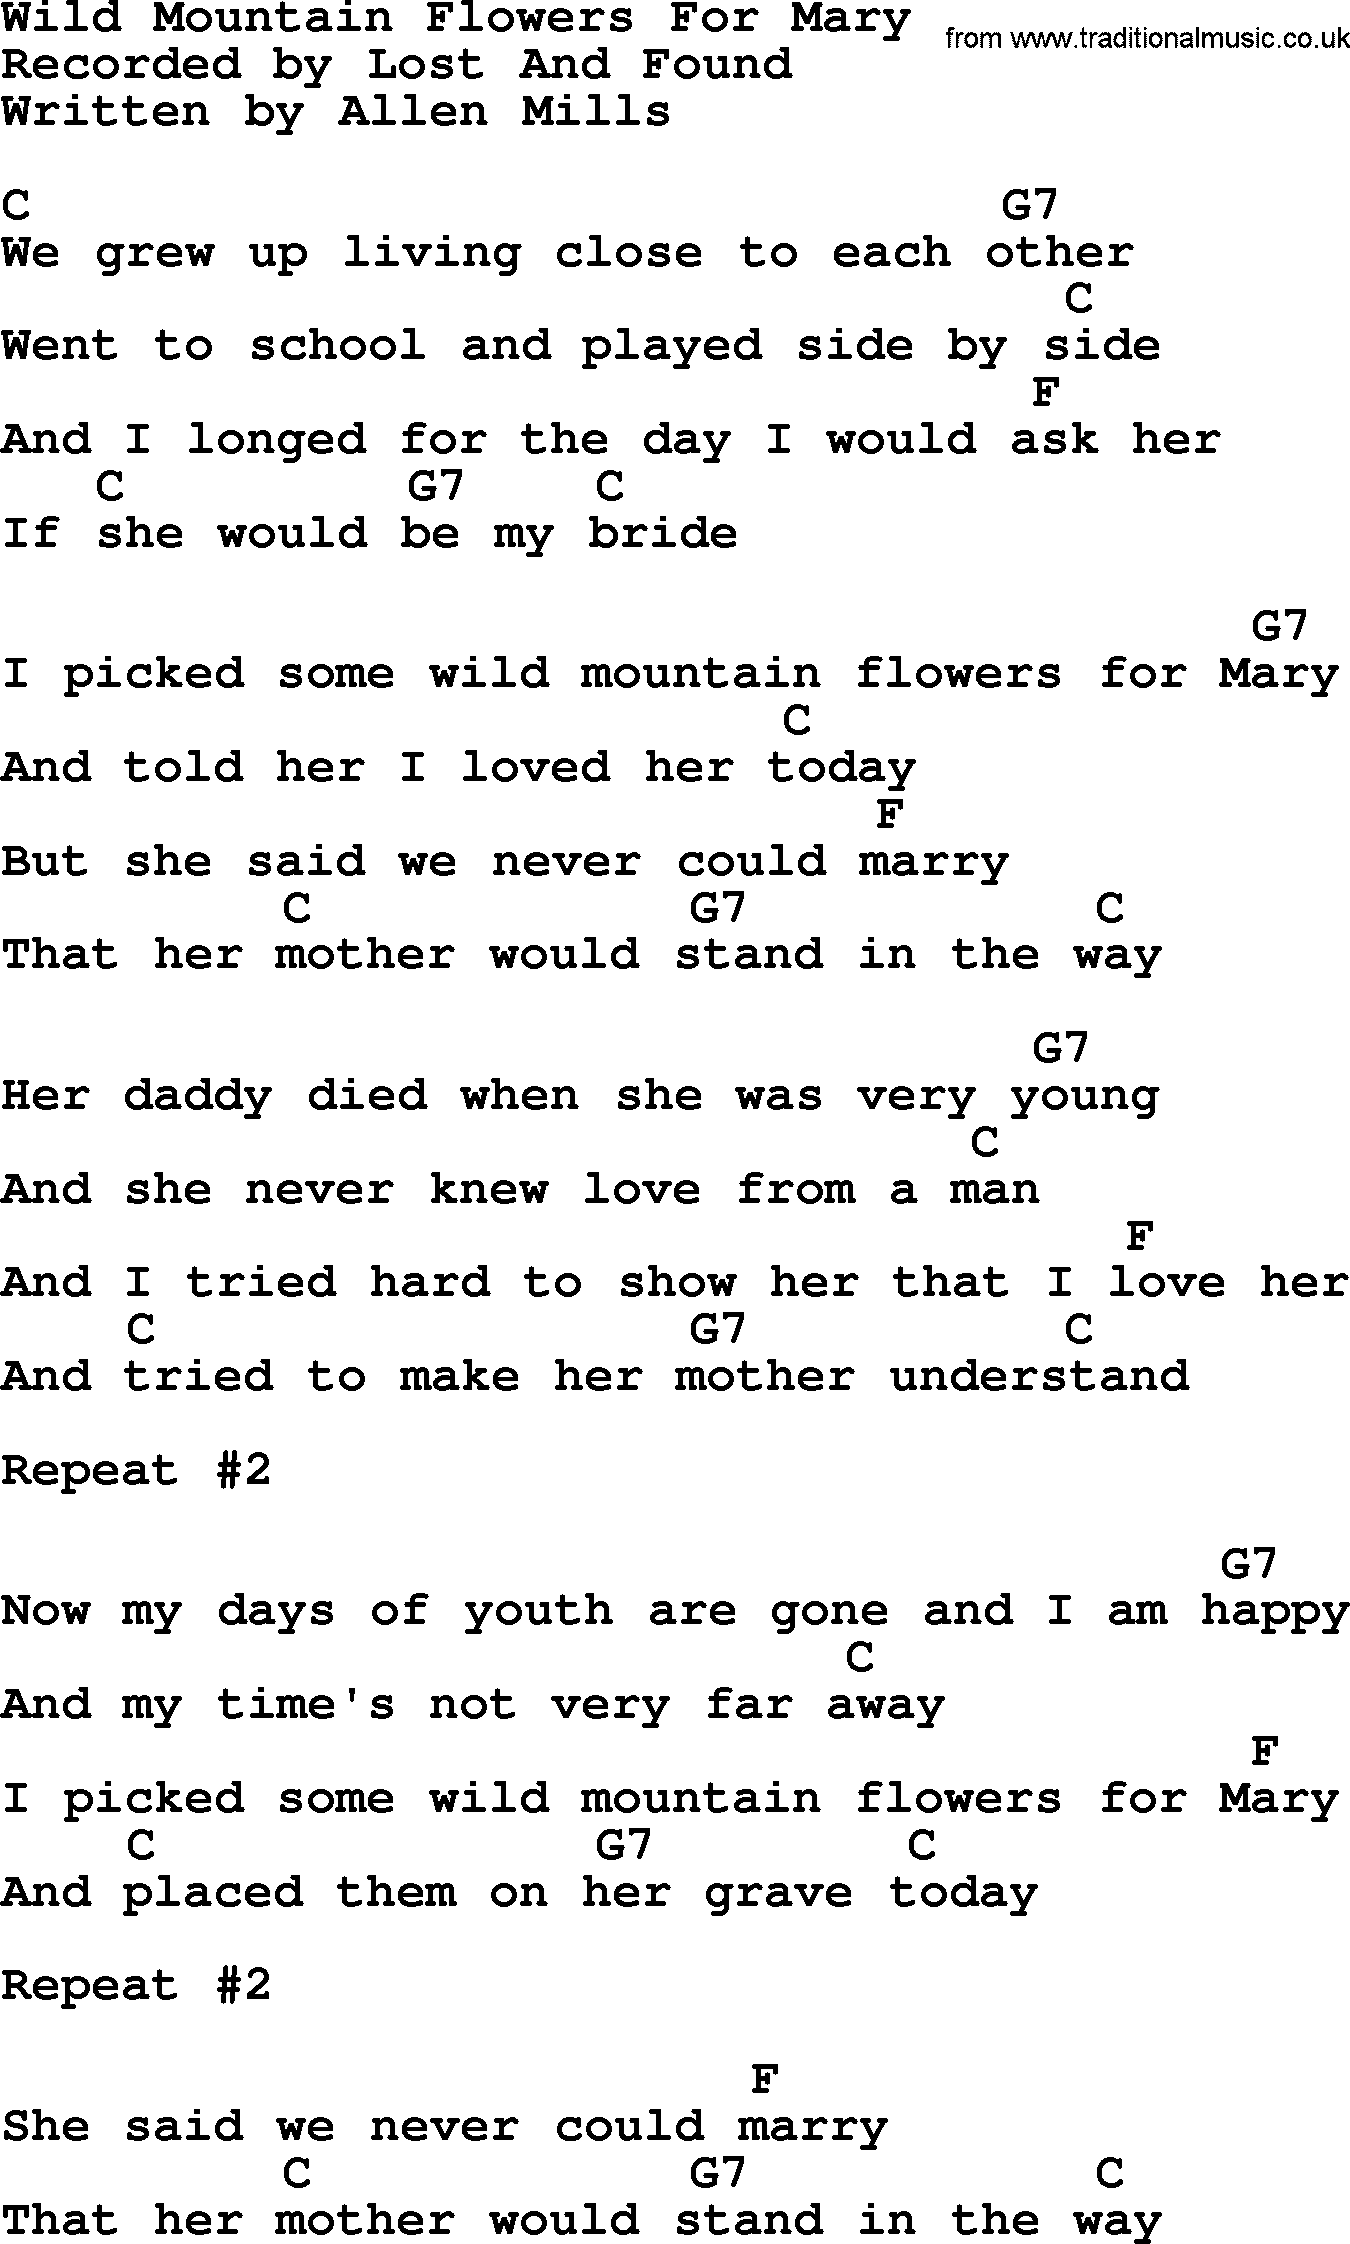 Bluegrass song: Wild Mountain Flowers For Mary, lyrics and chords